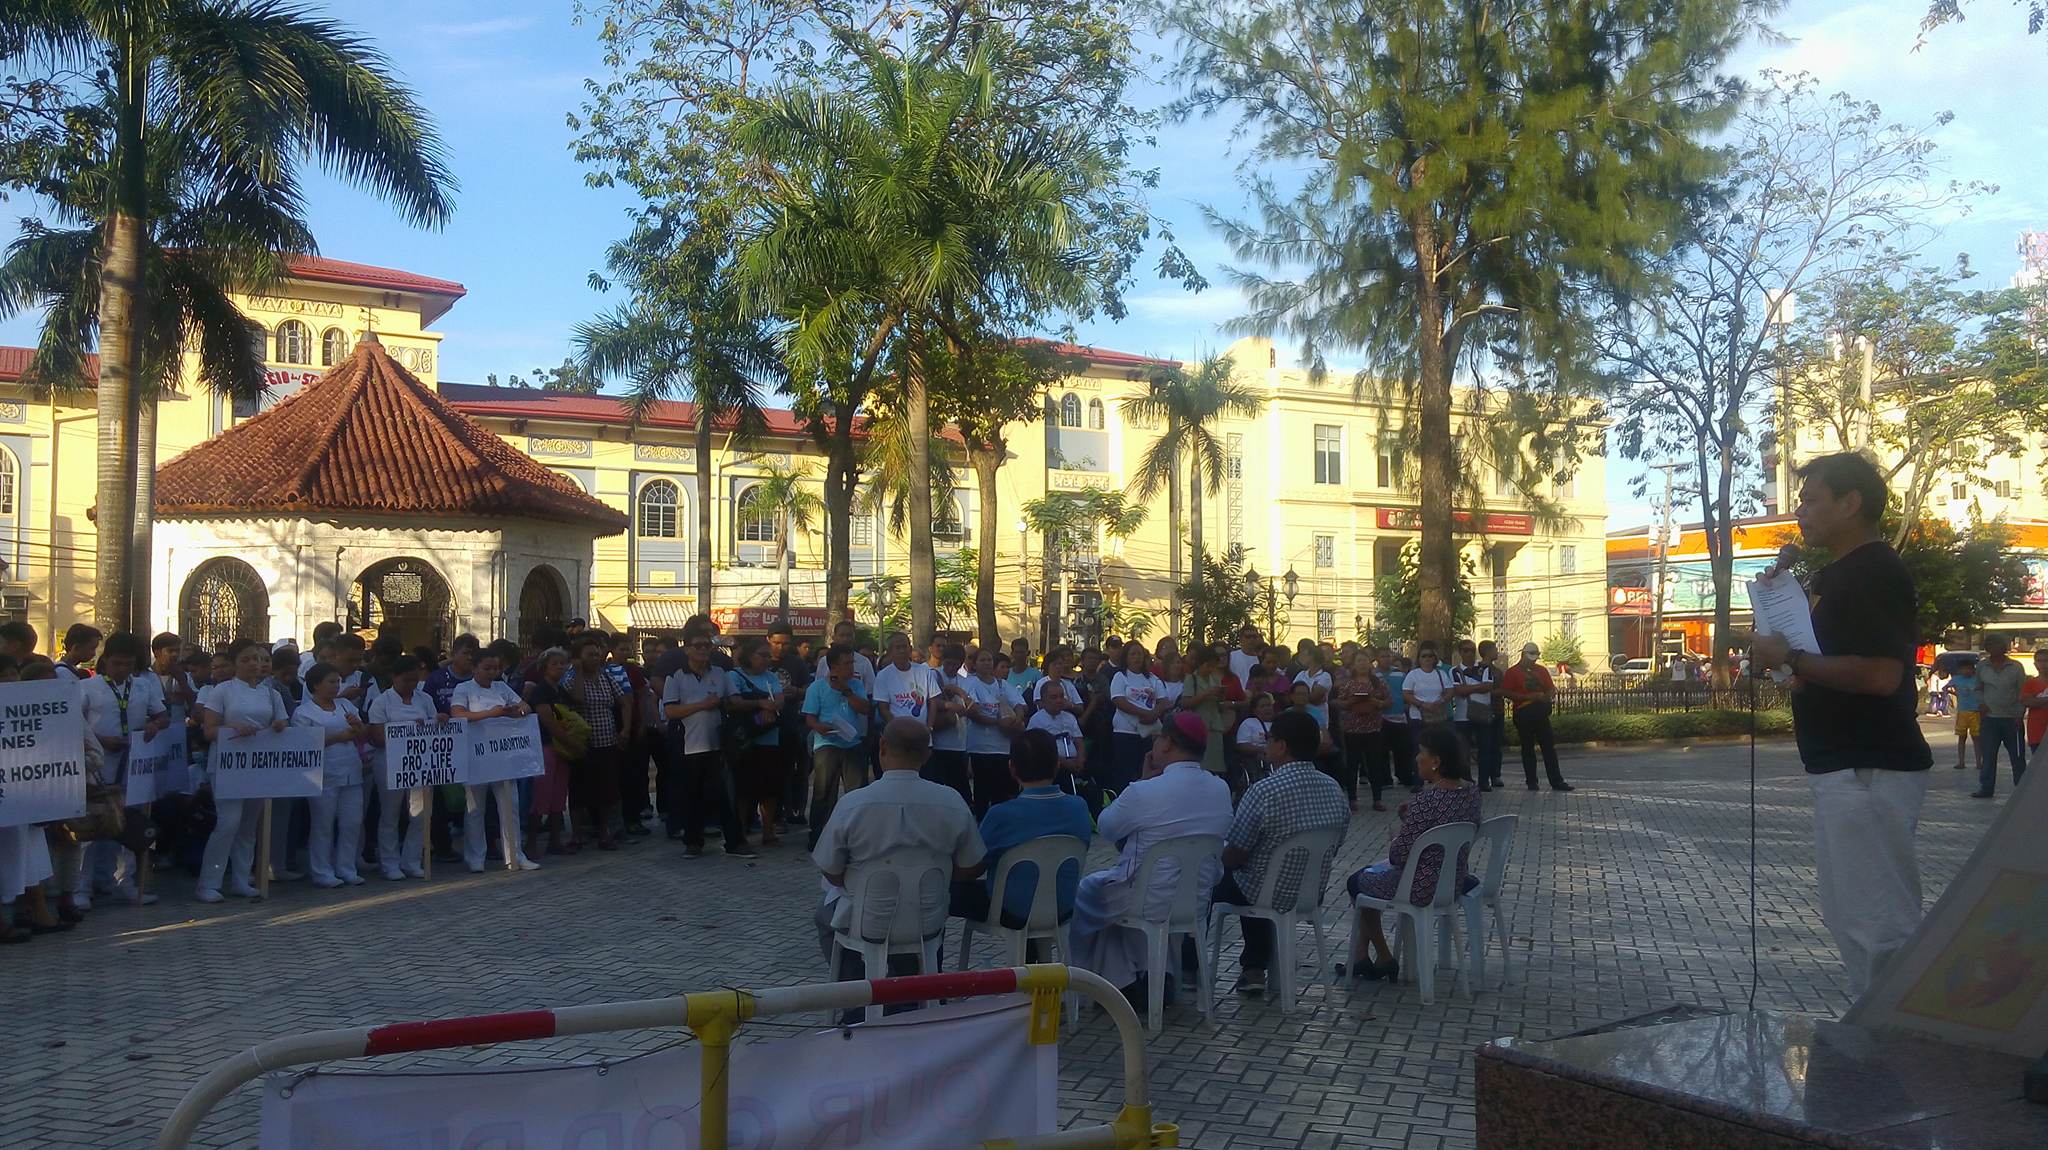  Pro-life advocates gather at Plaza Sugbo in Cebu City to oppose plans to revive the death penalty and extra-judicial killings.